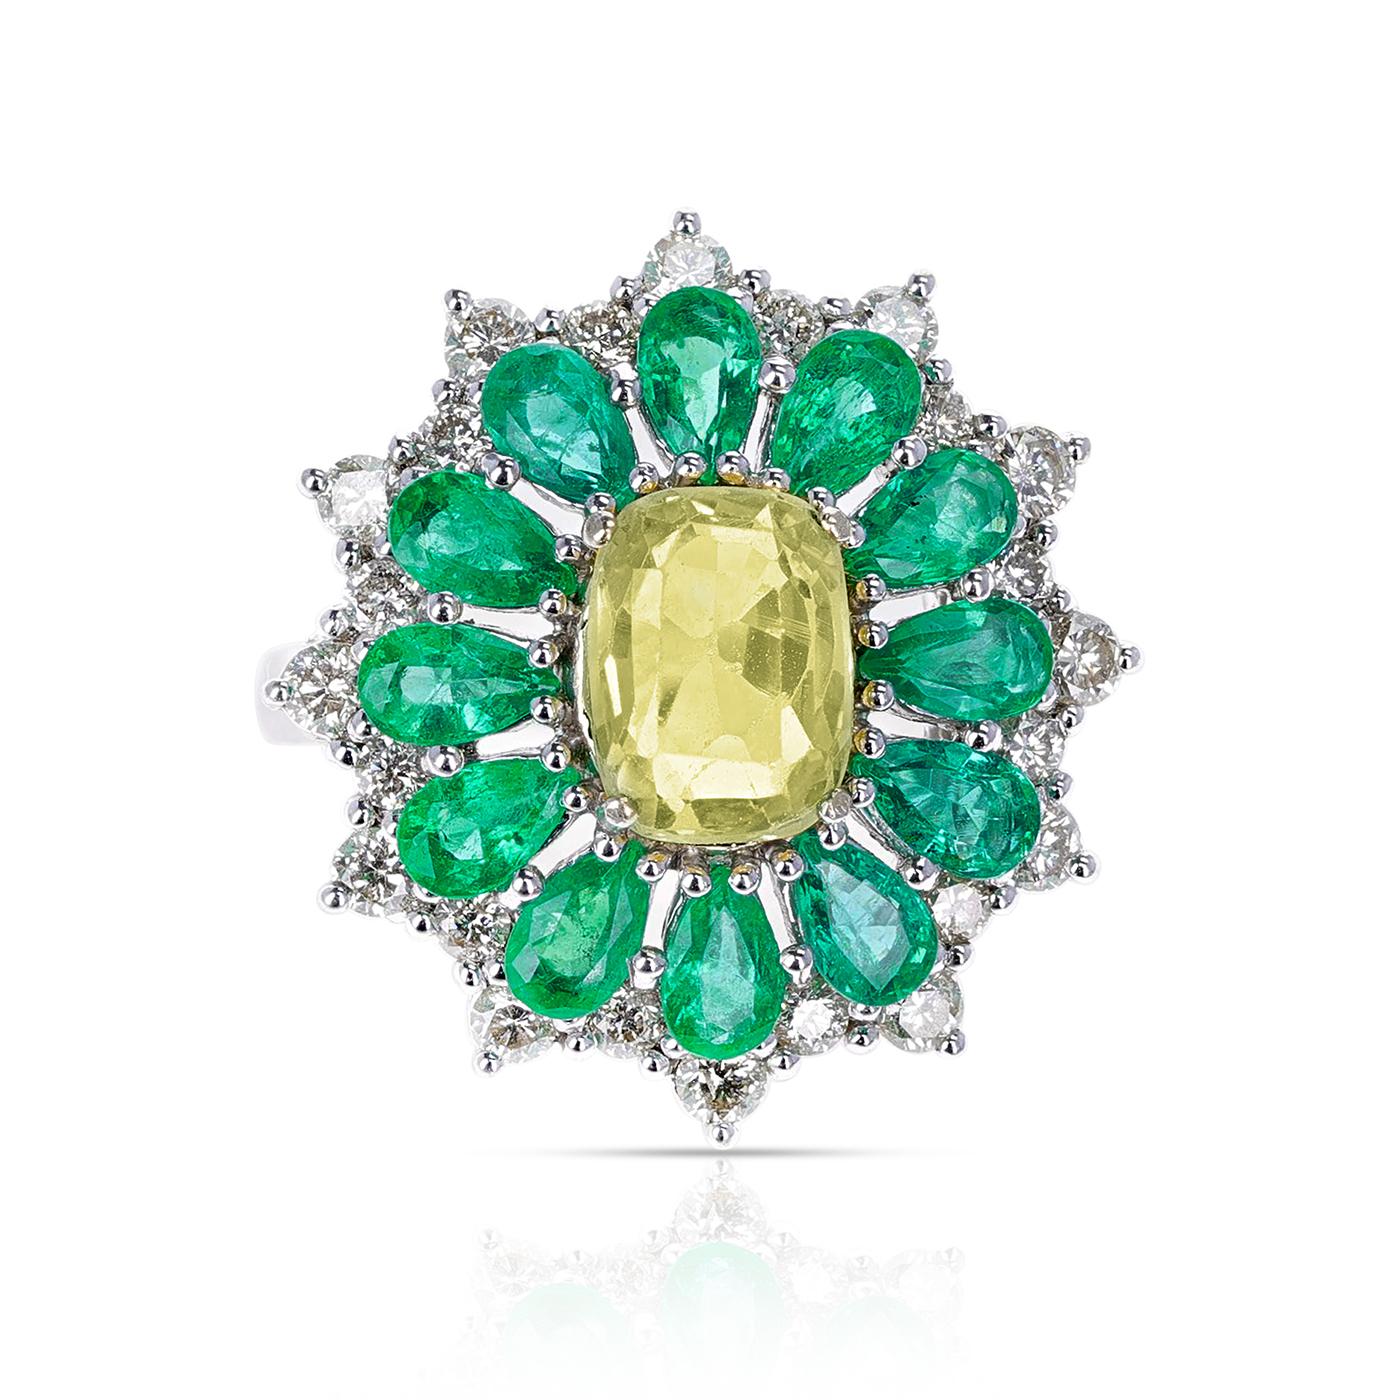 A stunning ring with Pear-Shape Emeralds, Round Diamonds and a Center Oval Cushion Yellow Sapphire, made in 18K White Gold. The yellow sapphires weigh appx. 2.74 carts. Ring Size US 8. Total weight: 8.80 grams. 